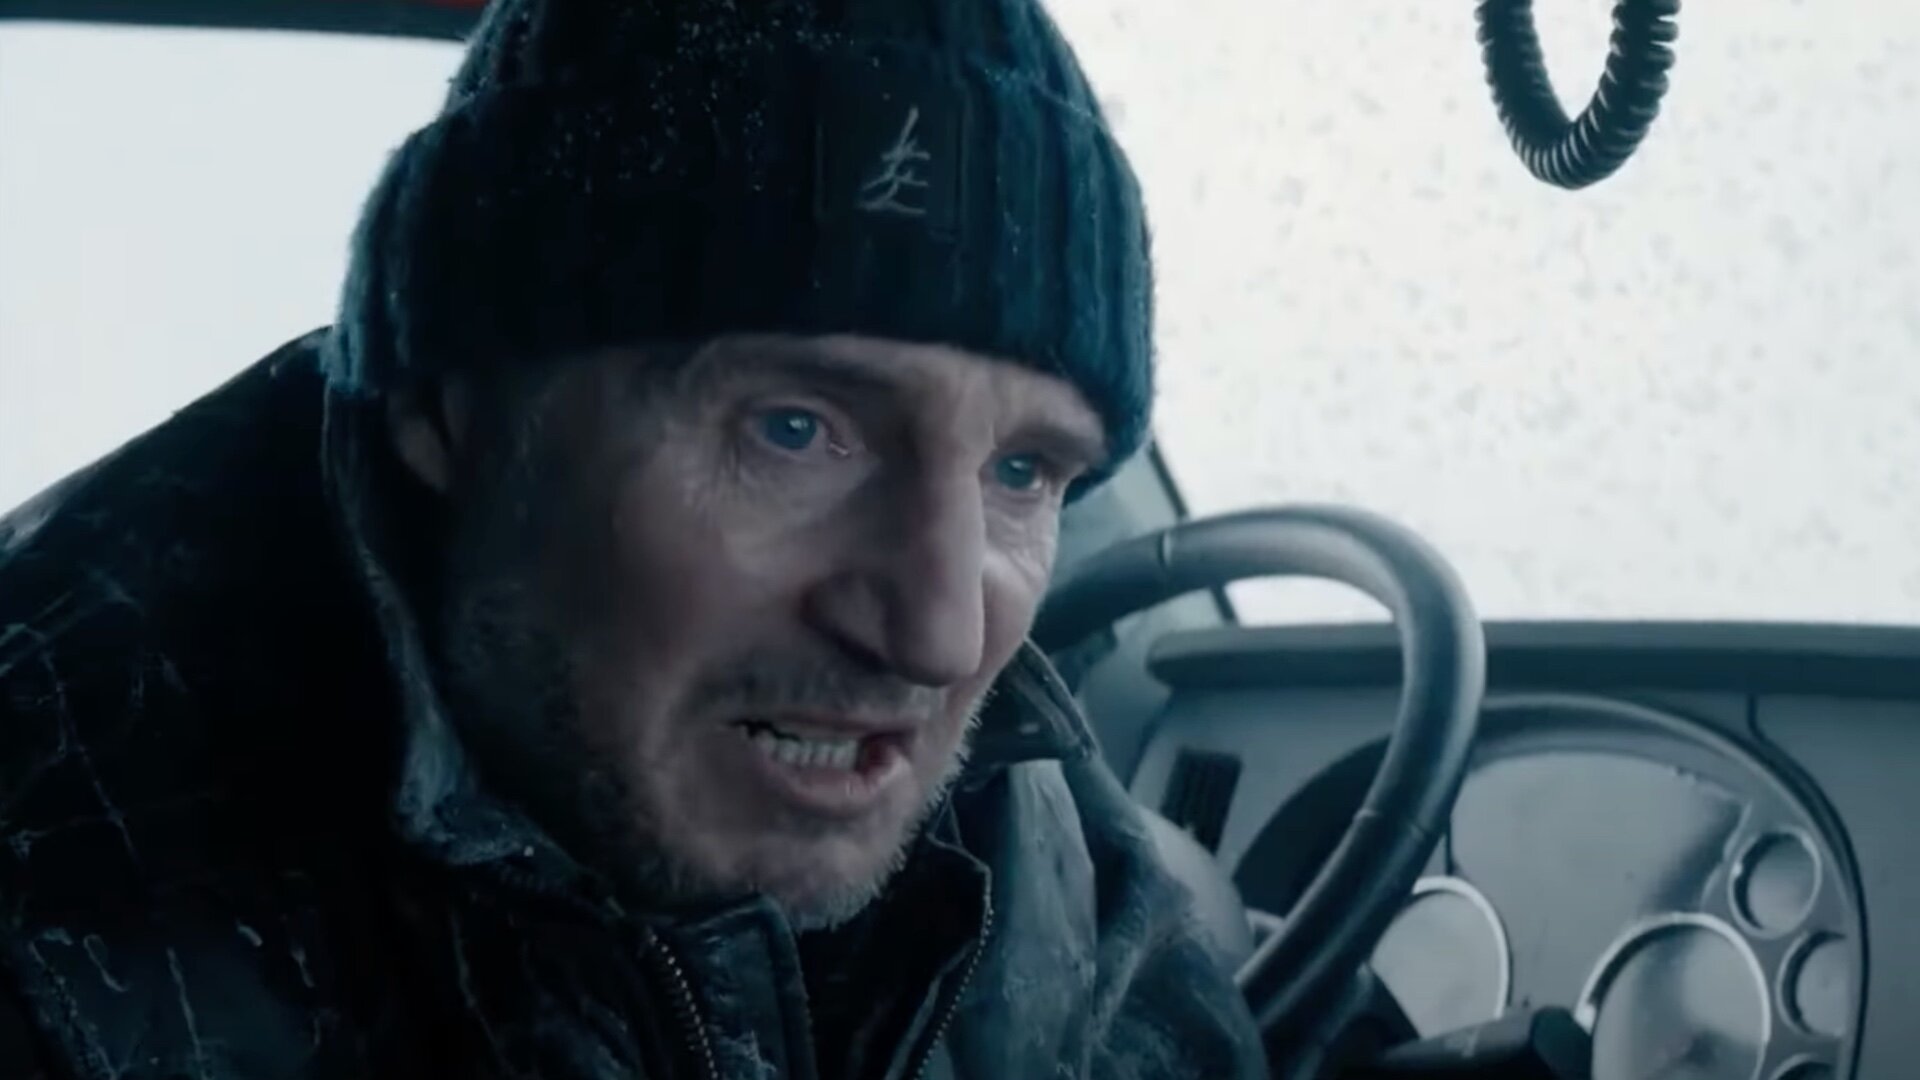 Trailer For Liam Neeson's Ice Road Trucking Rescue Thriller THE ICE ROAD — GeekTyrant